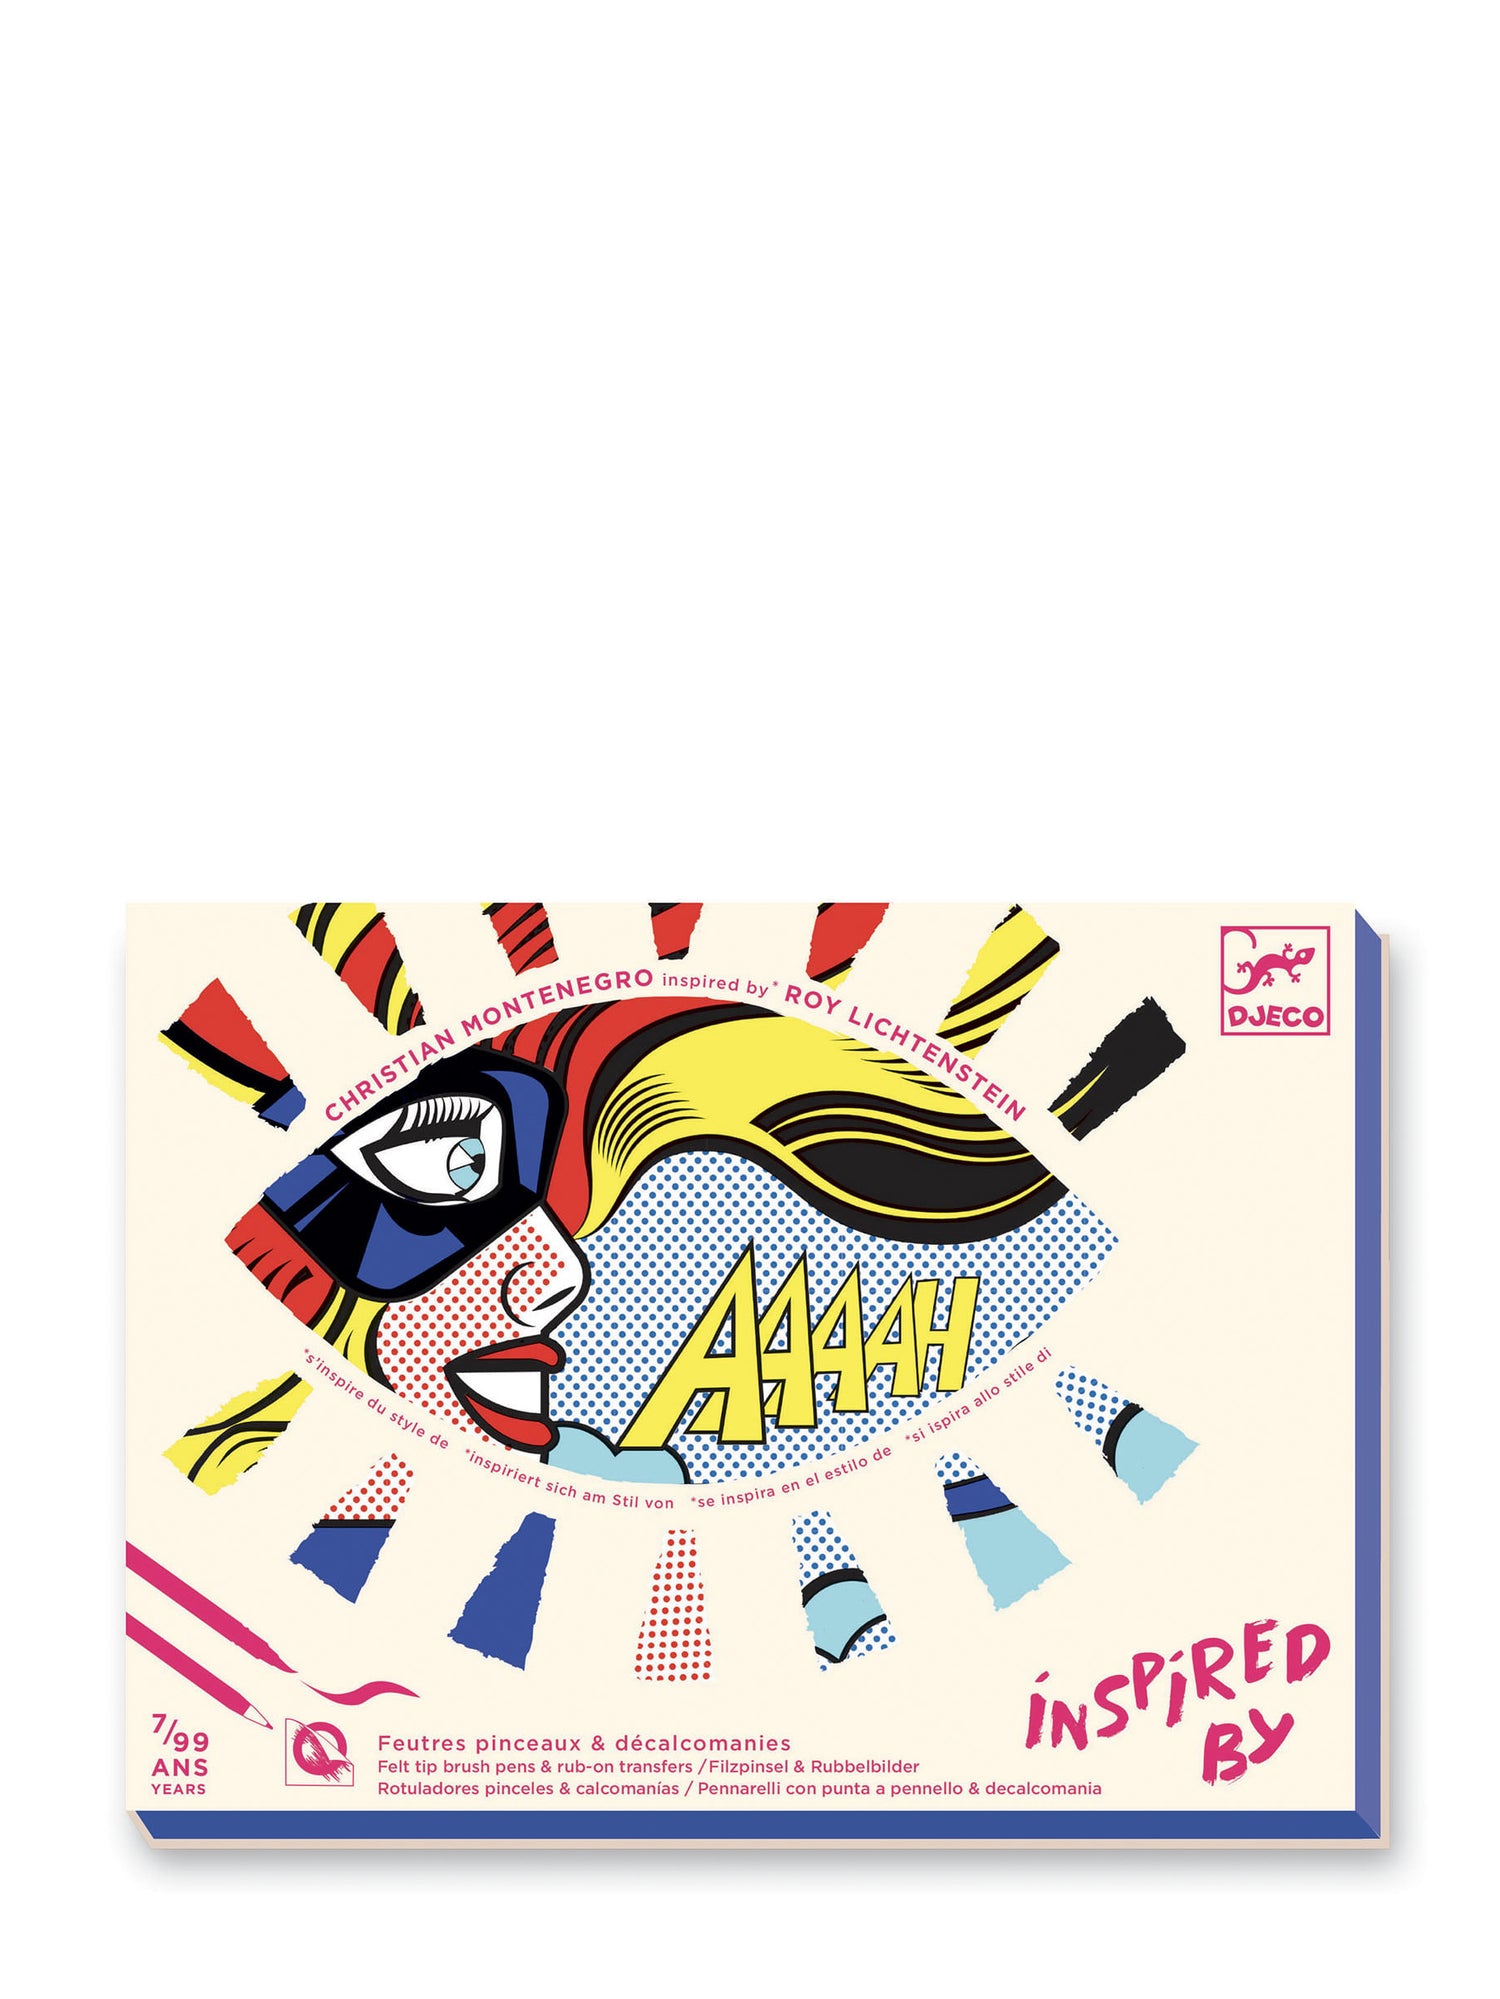 Superheroes Transfer and Colouring Kit - Inspired by Roy Lichtenstein